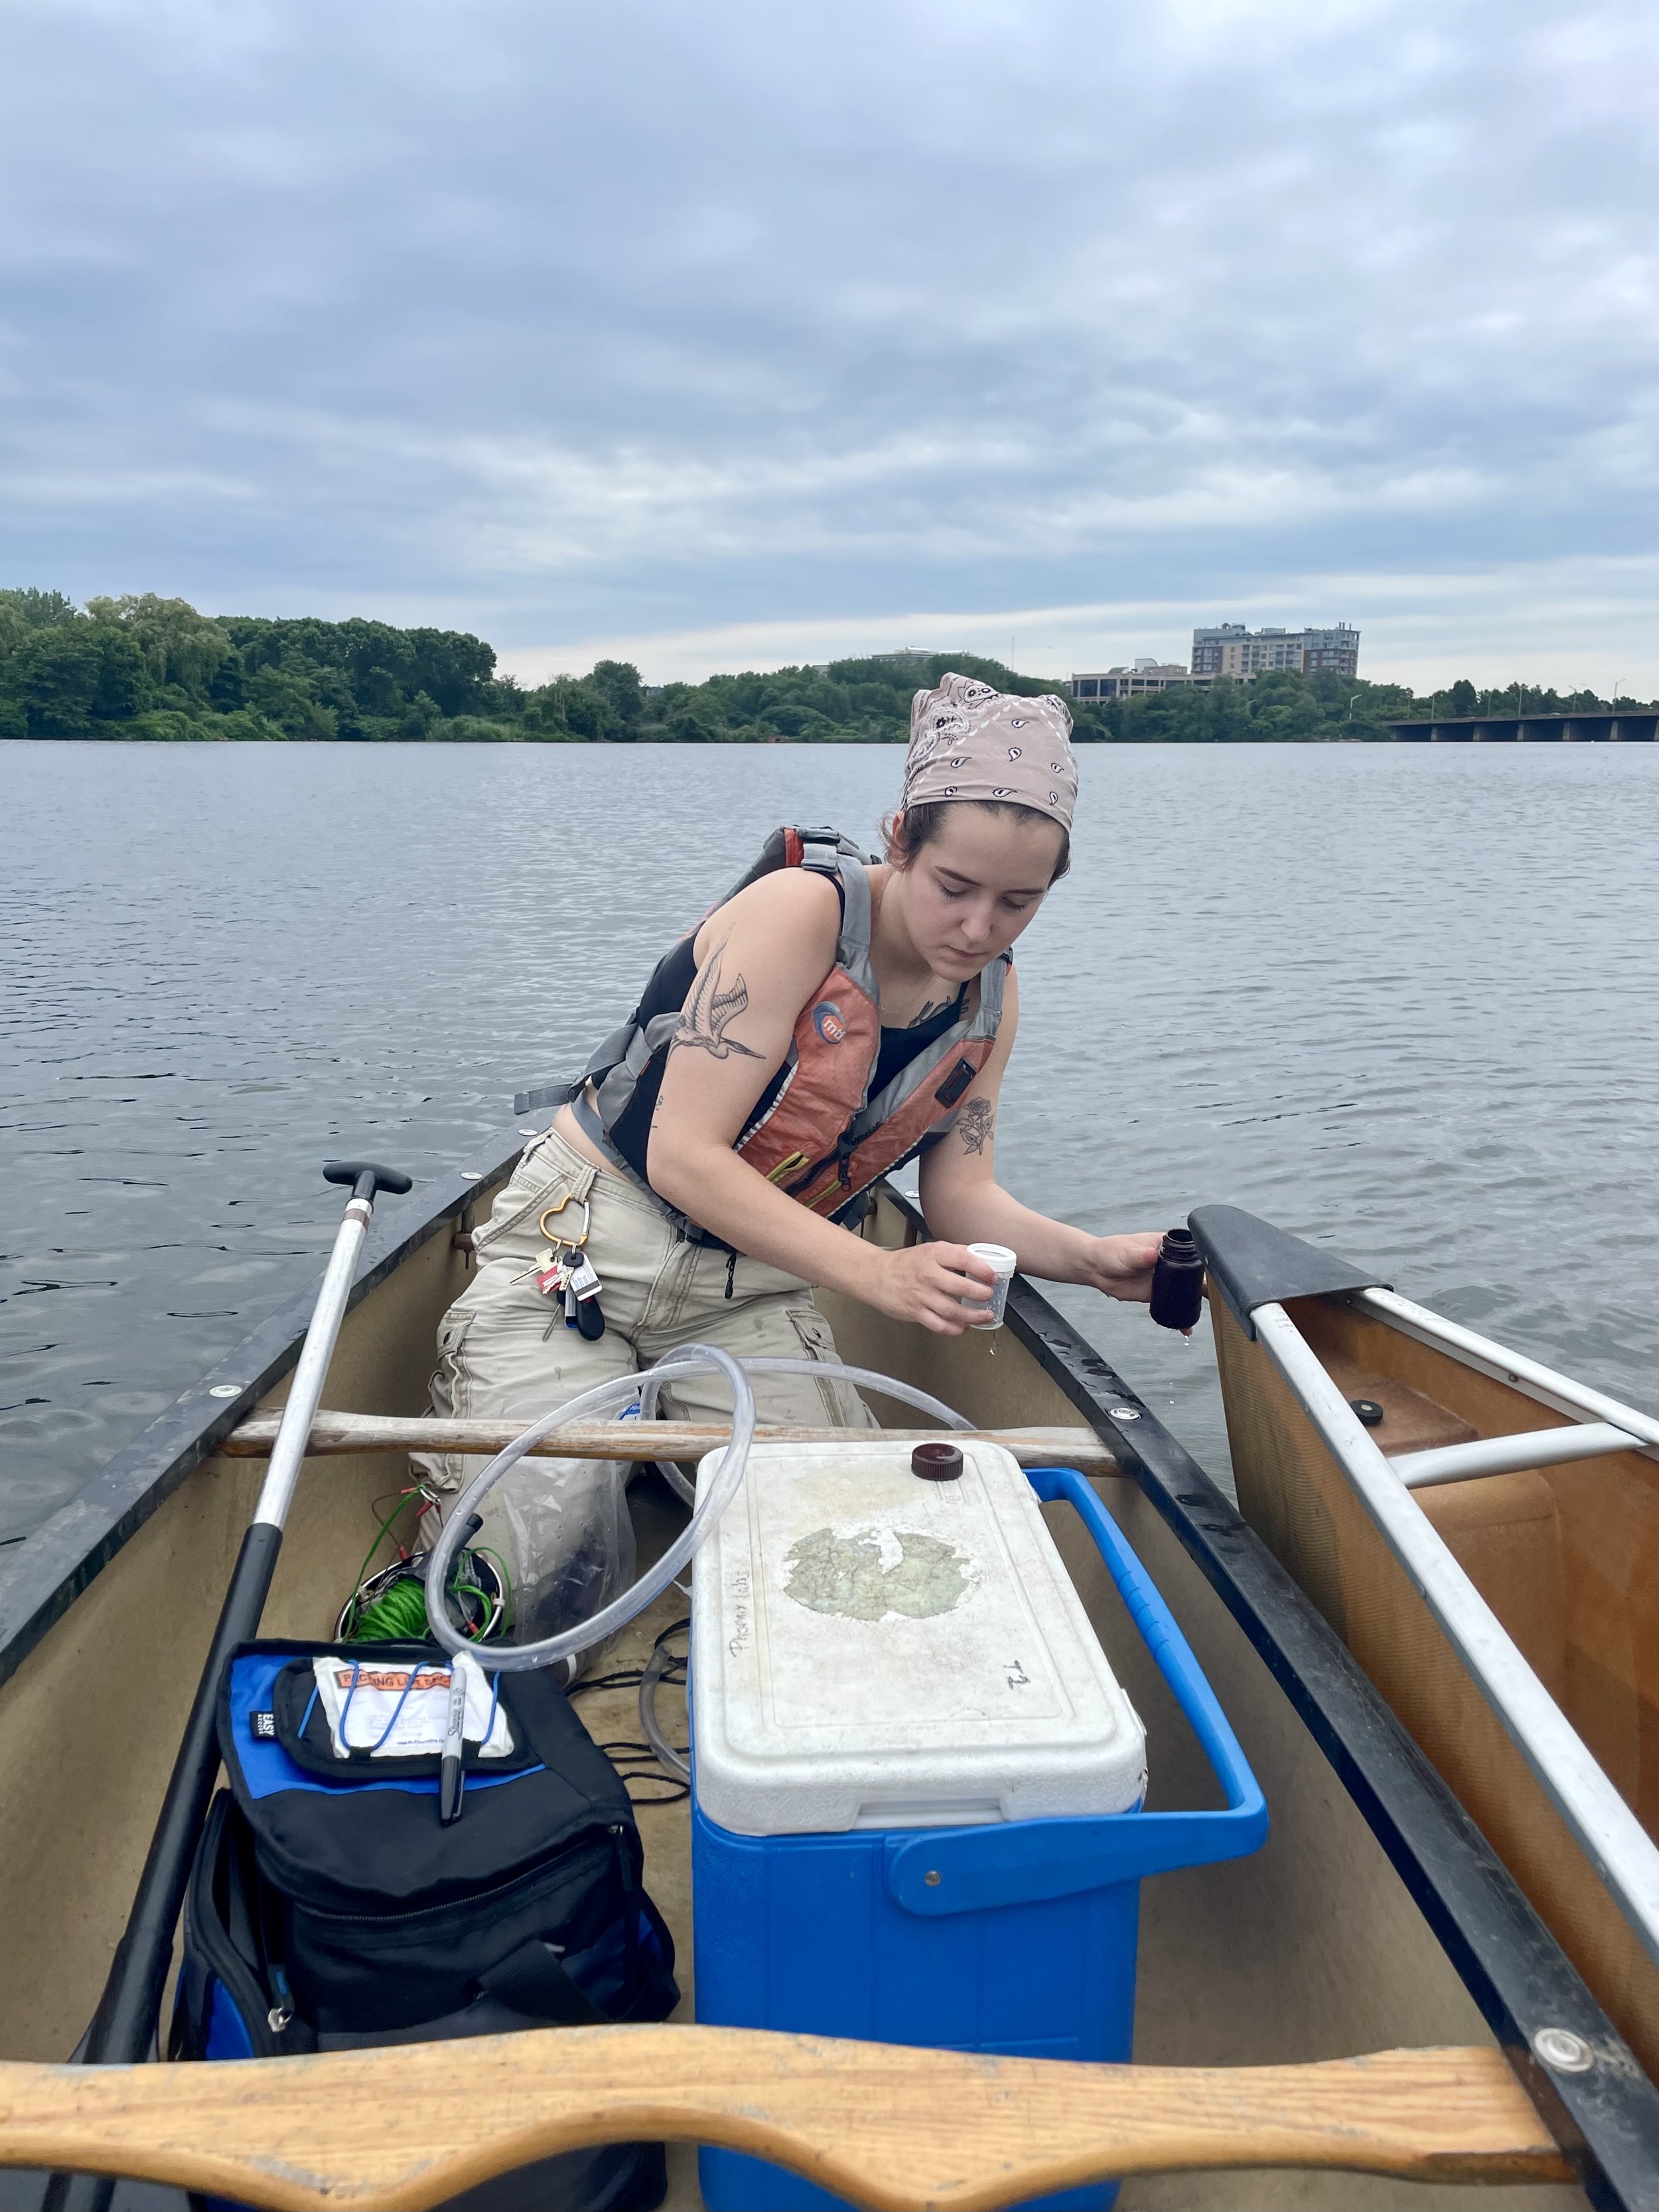  8.1.2022 | Environmental Science and Stewardship Fellow Kate Schassler collects samples from the Mystic Lakes for  cyanobacteria monitoring . MyRWA was lucky to have a cohort of NINE fellows working with us this summer, contributing to water quality